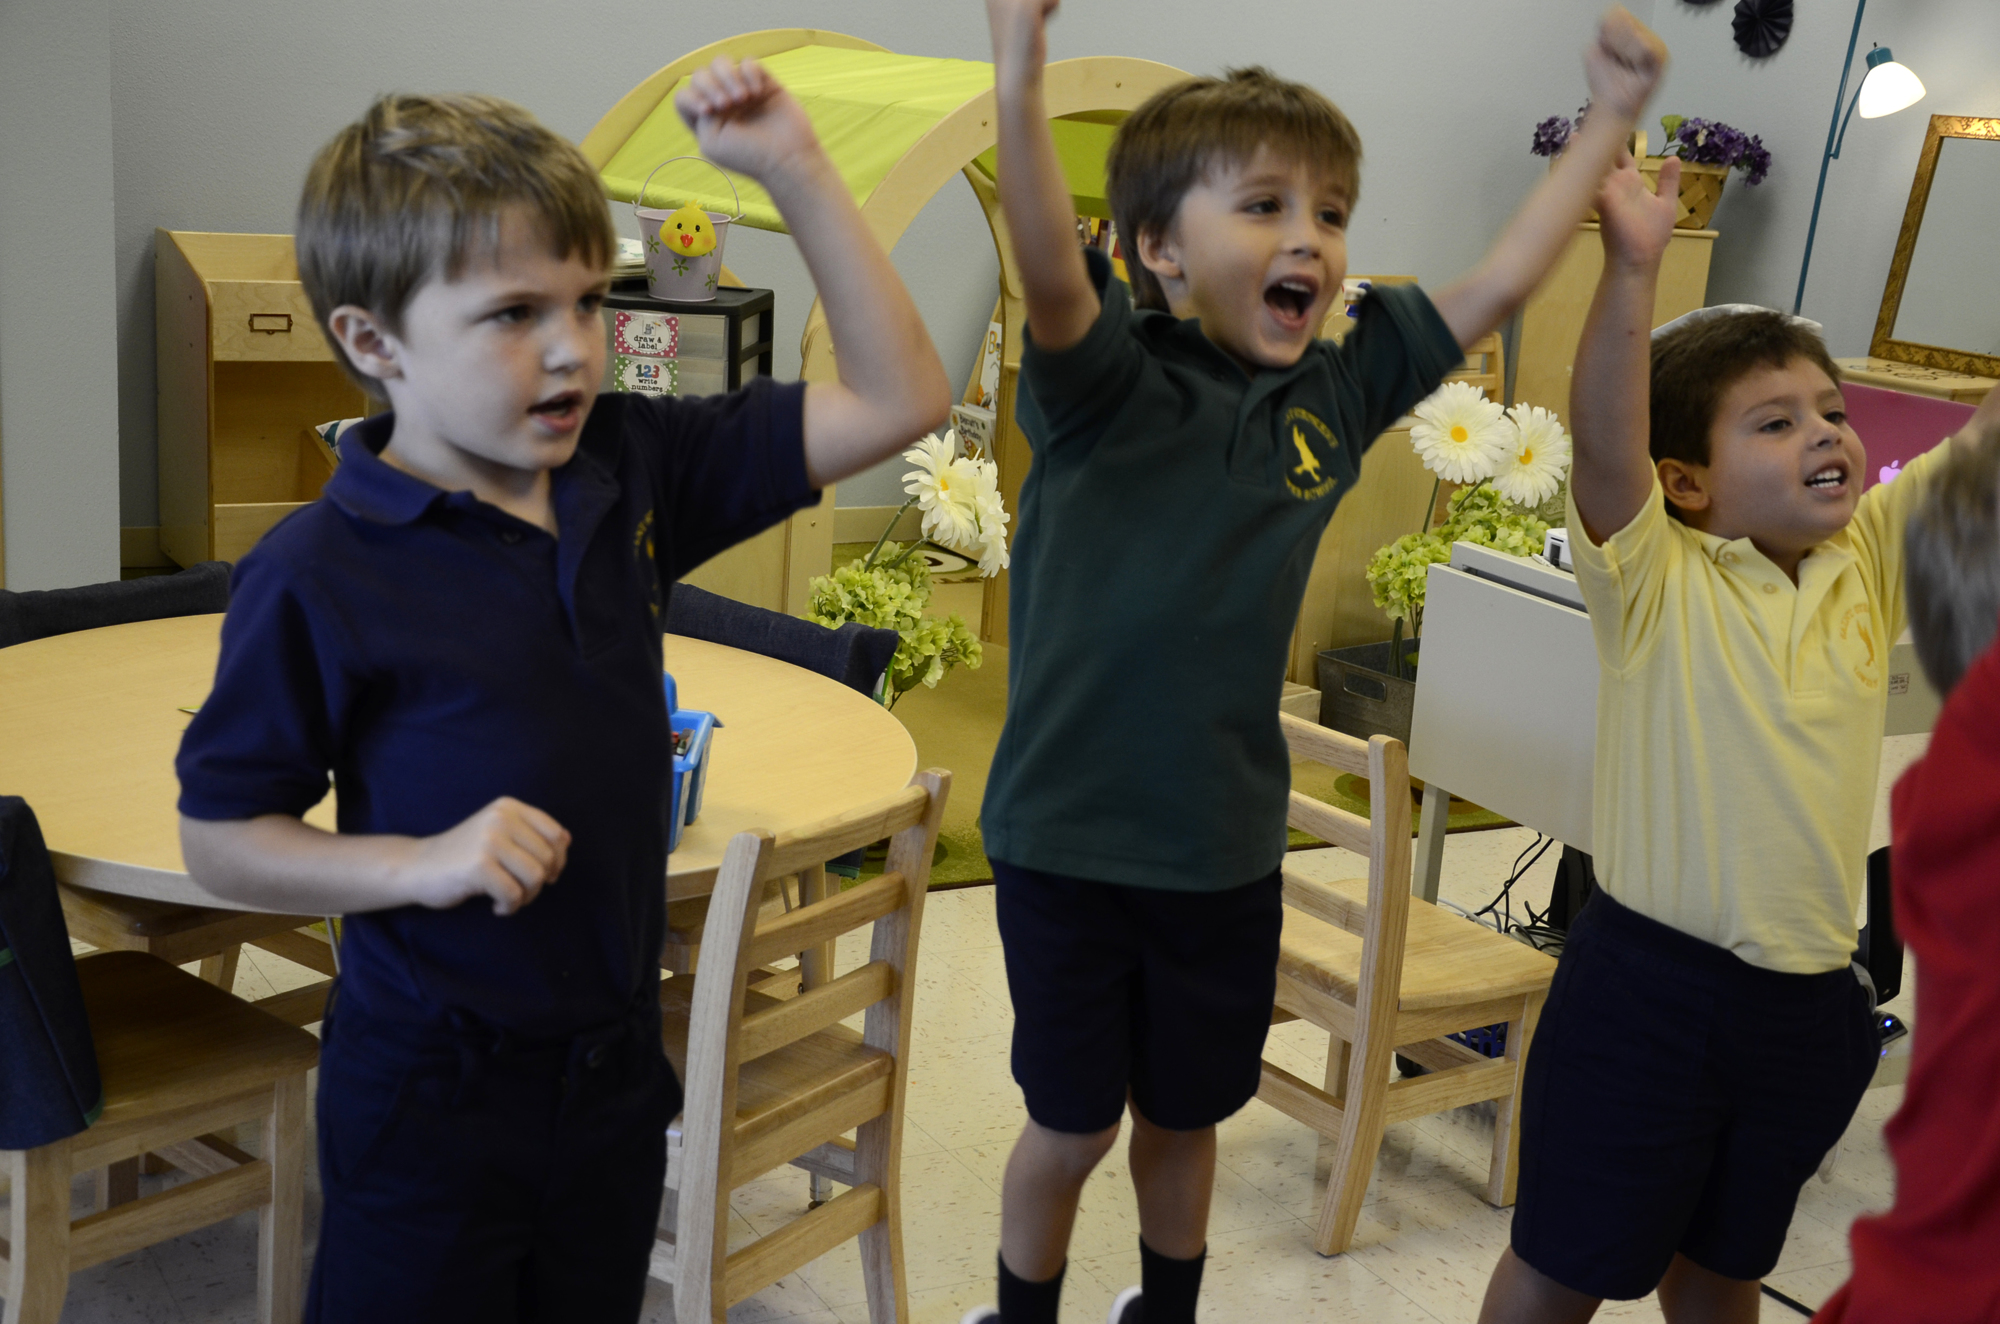 Collin  Freeman, Brennon Bonnett and Paul Cronen got excited during singing in class.